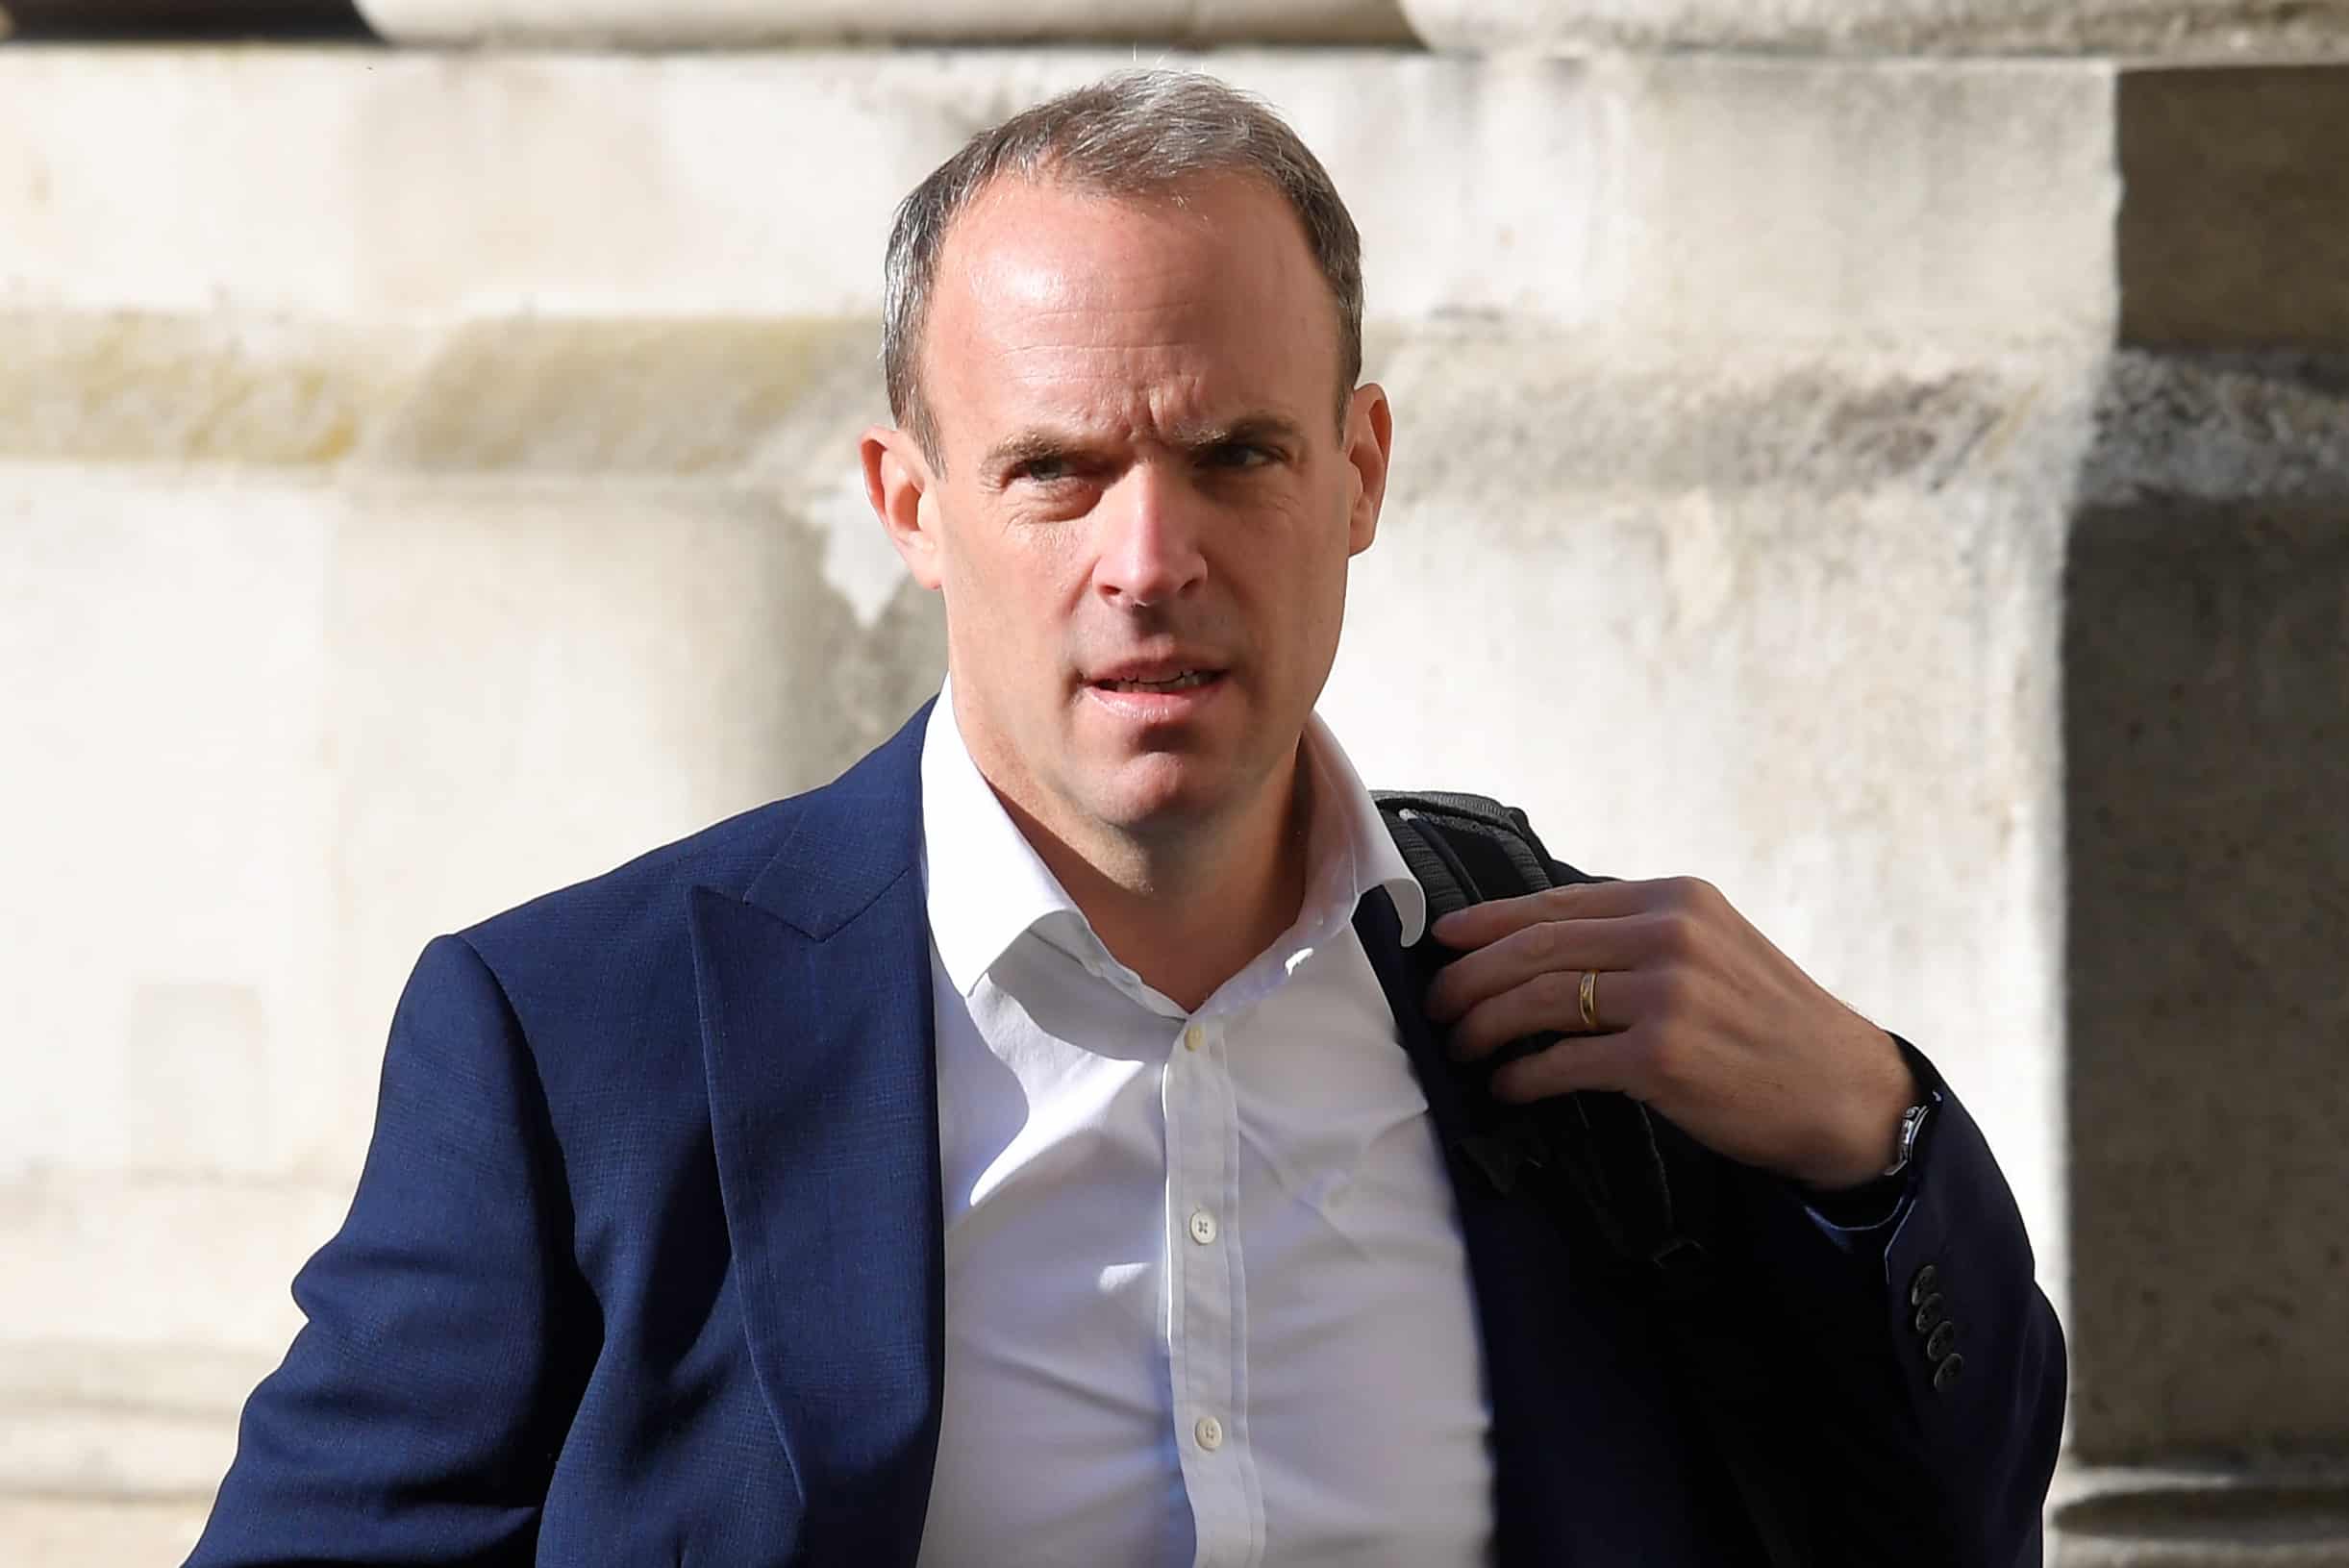 BBC presenter hits back at claims he was ‘nasty and unpleasant’ to Raab